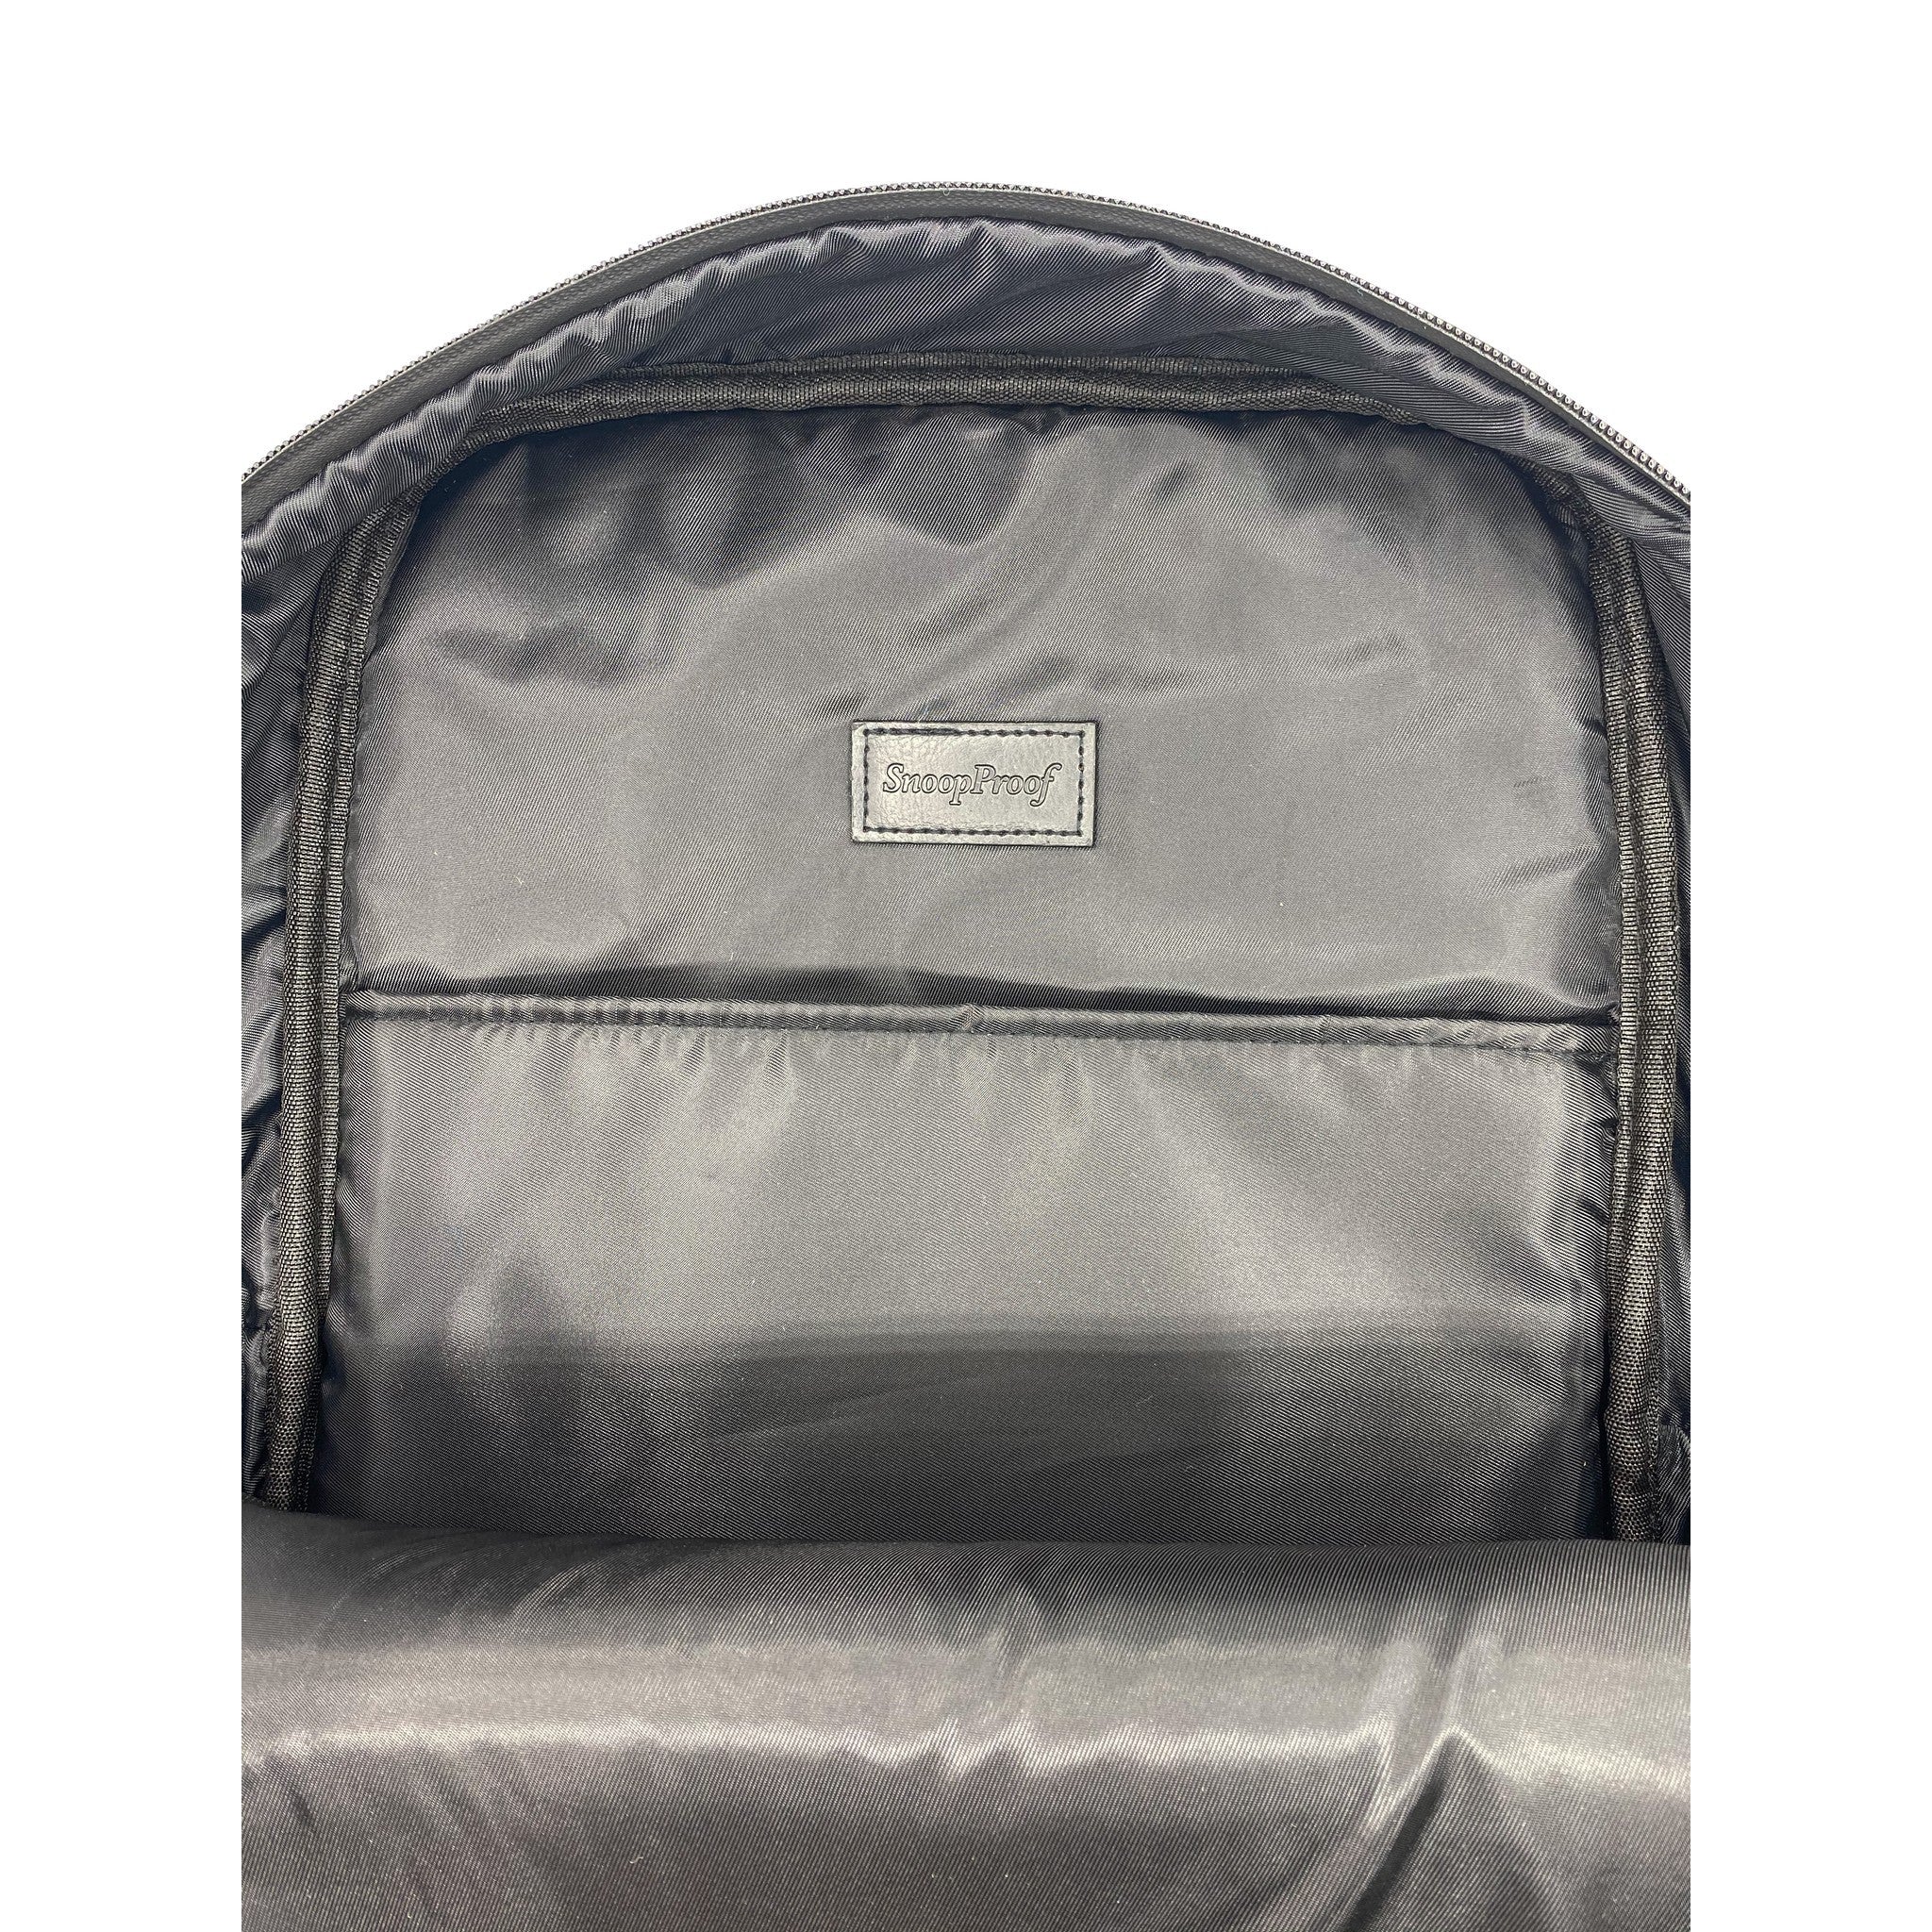 The SP BackPack in Grey & White